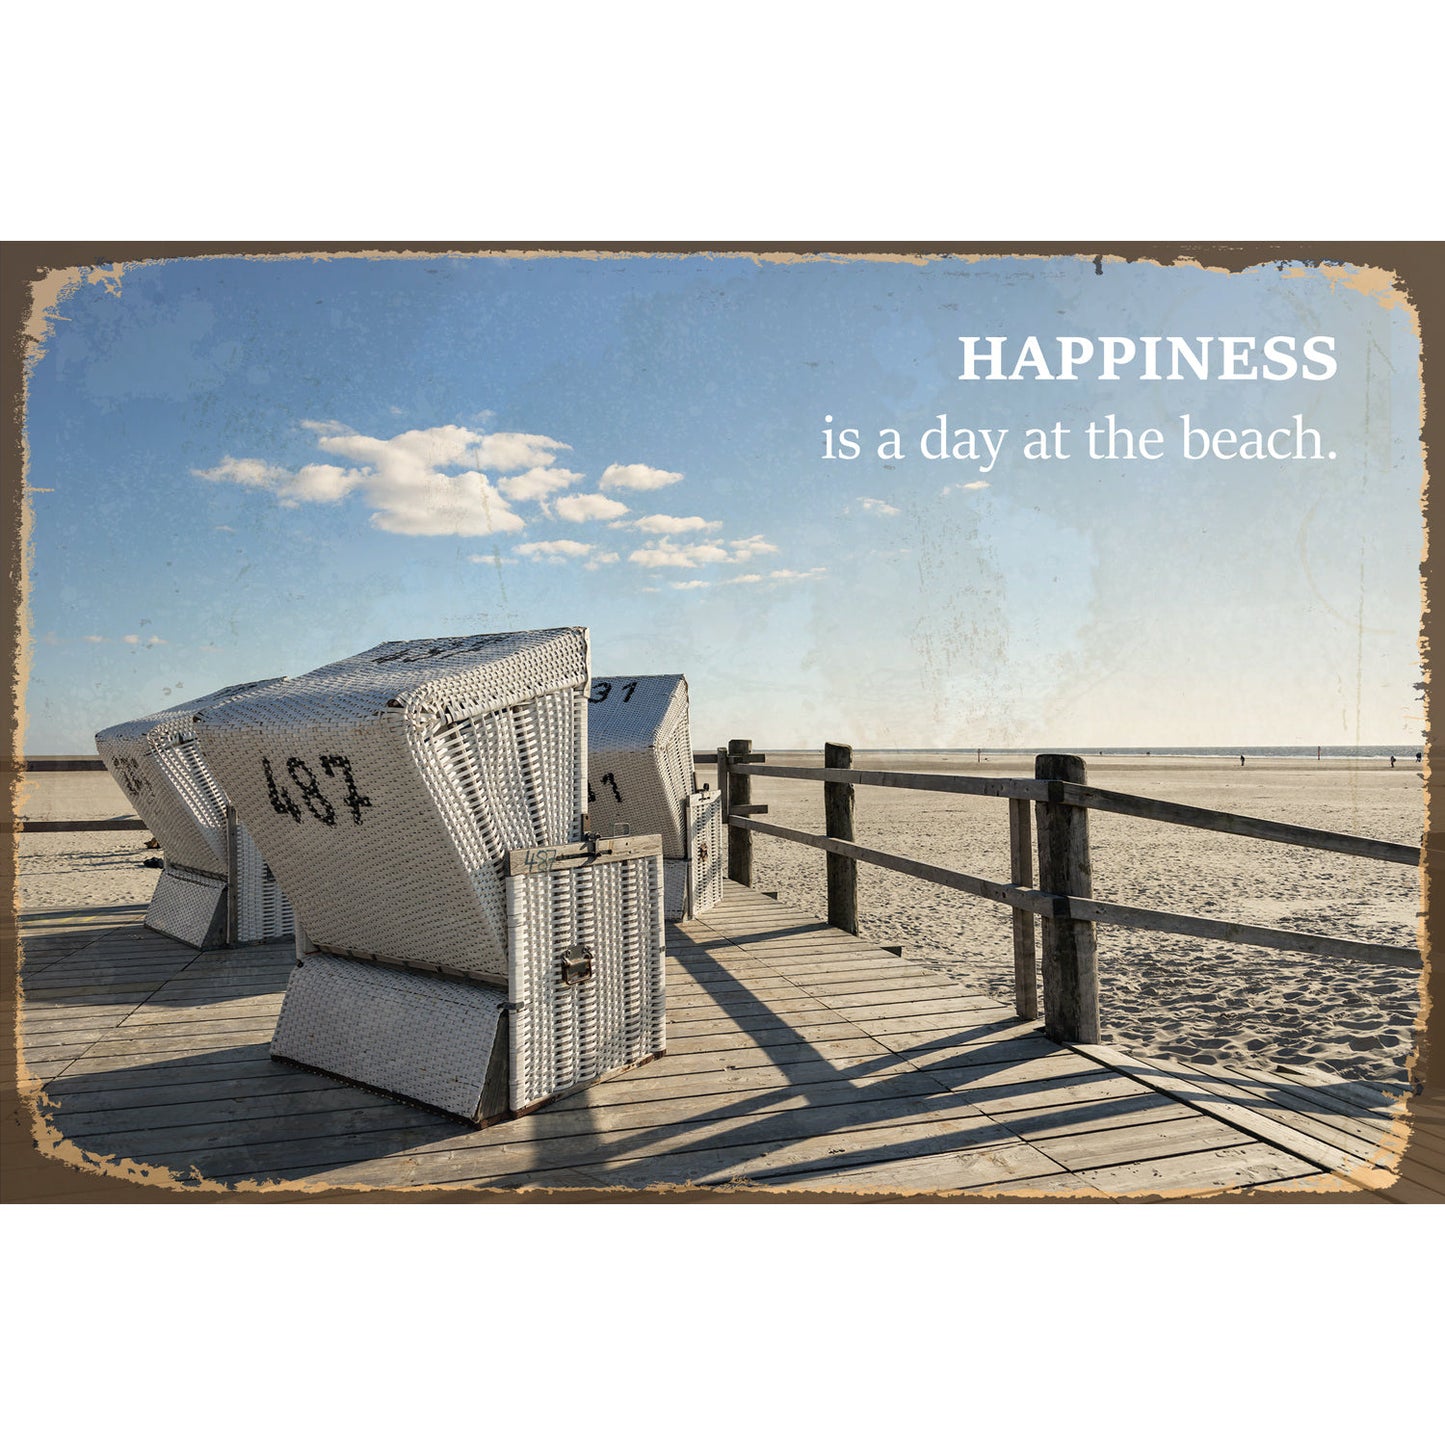 Blechschild - Happiness is a day at the beach